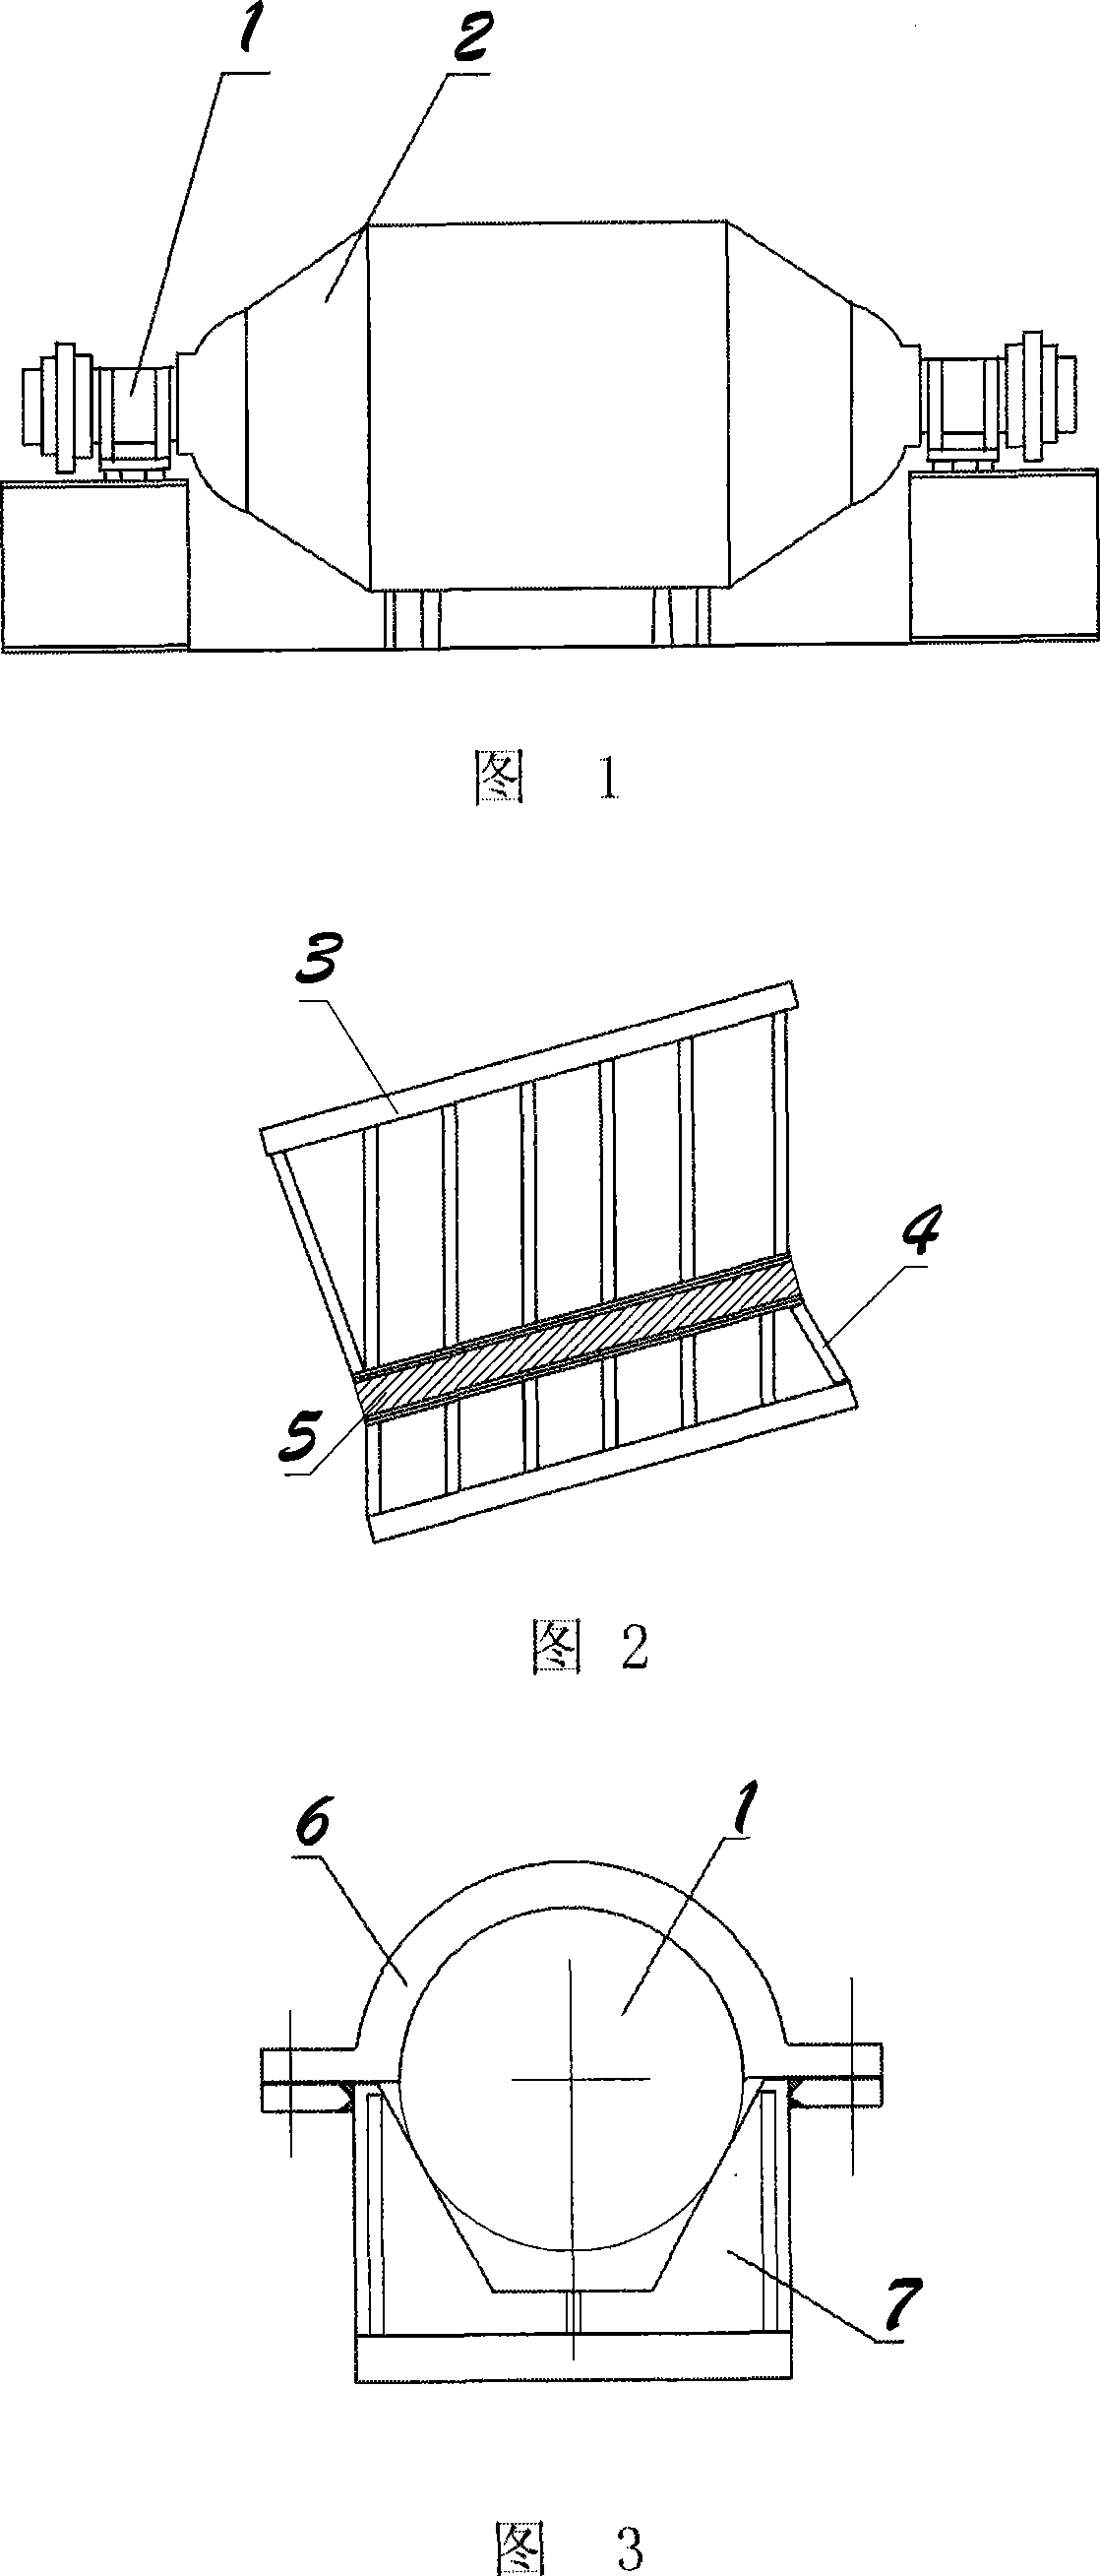 Method for feeding material and group soldering macrotype torpedo tank